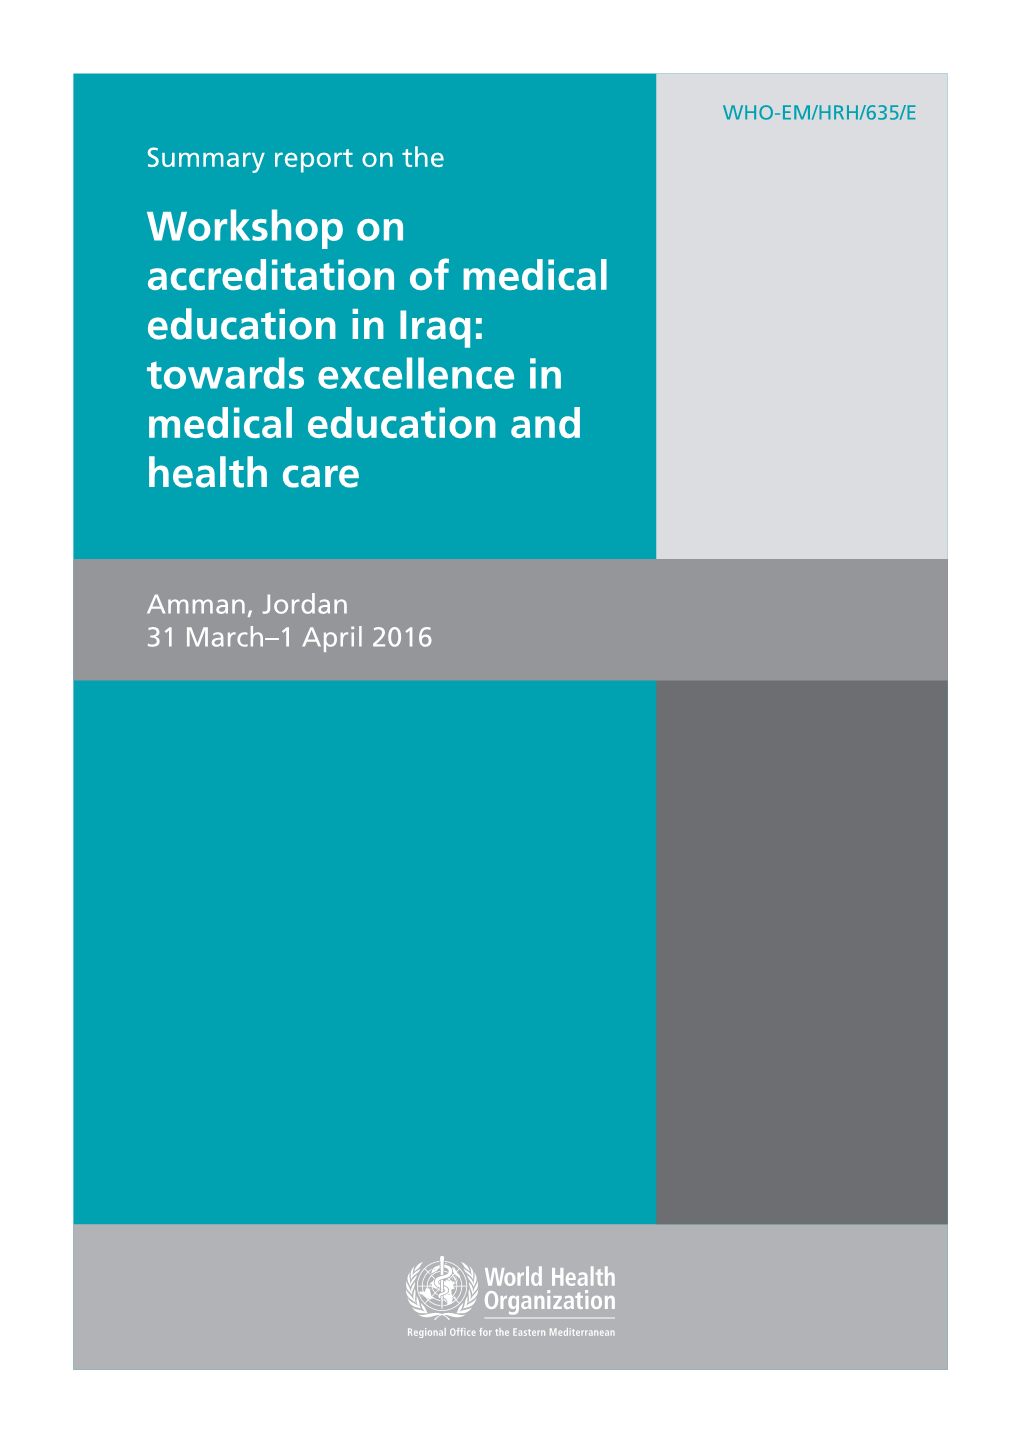 Workshop on Accreditation of Medical Education in Iraq: Towards Excellence in Medical Education and Health Care